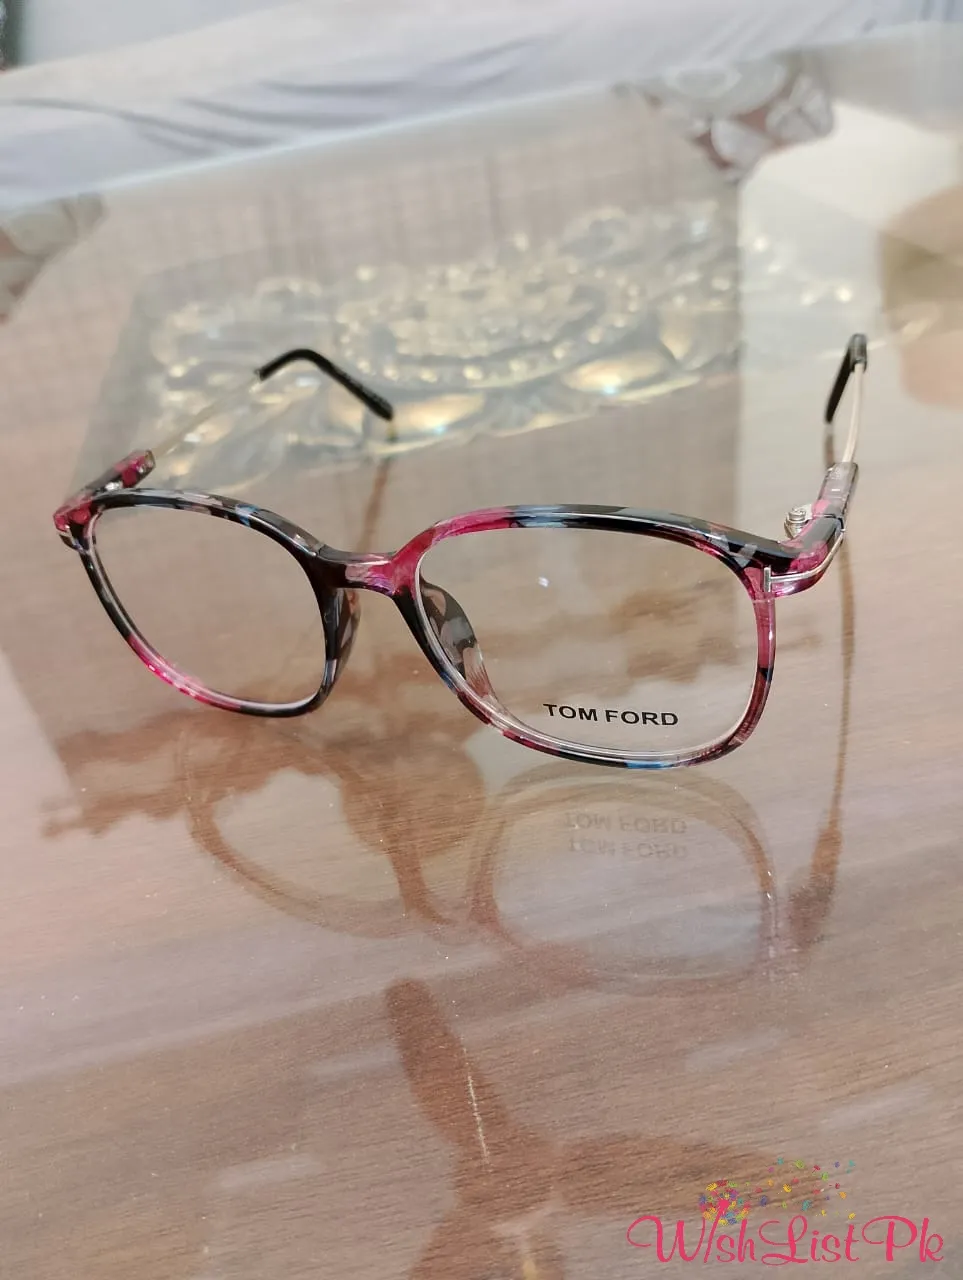 Best Price Tom Ford Spectacles